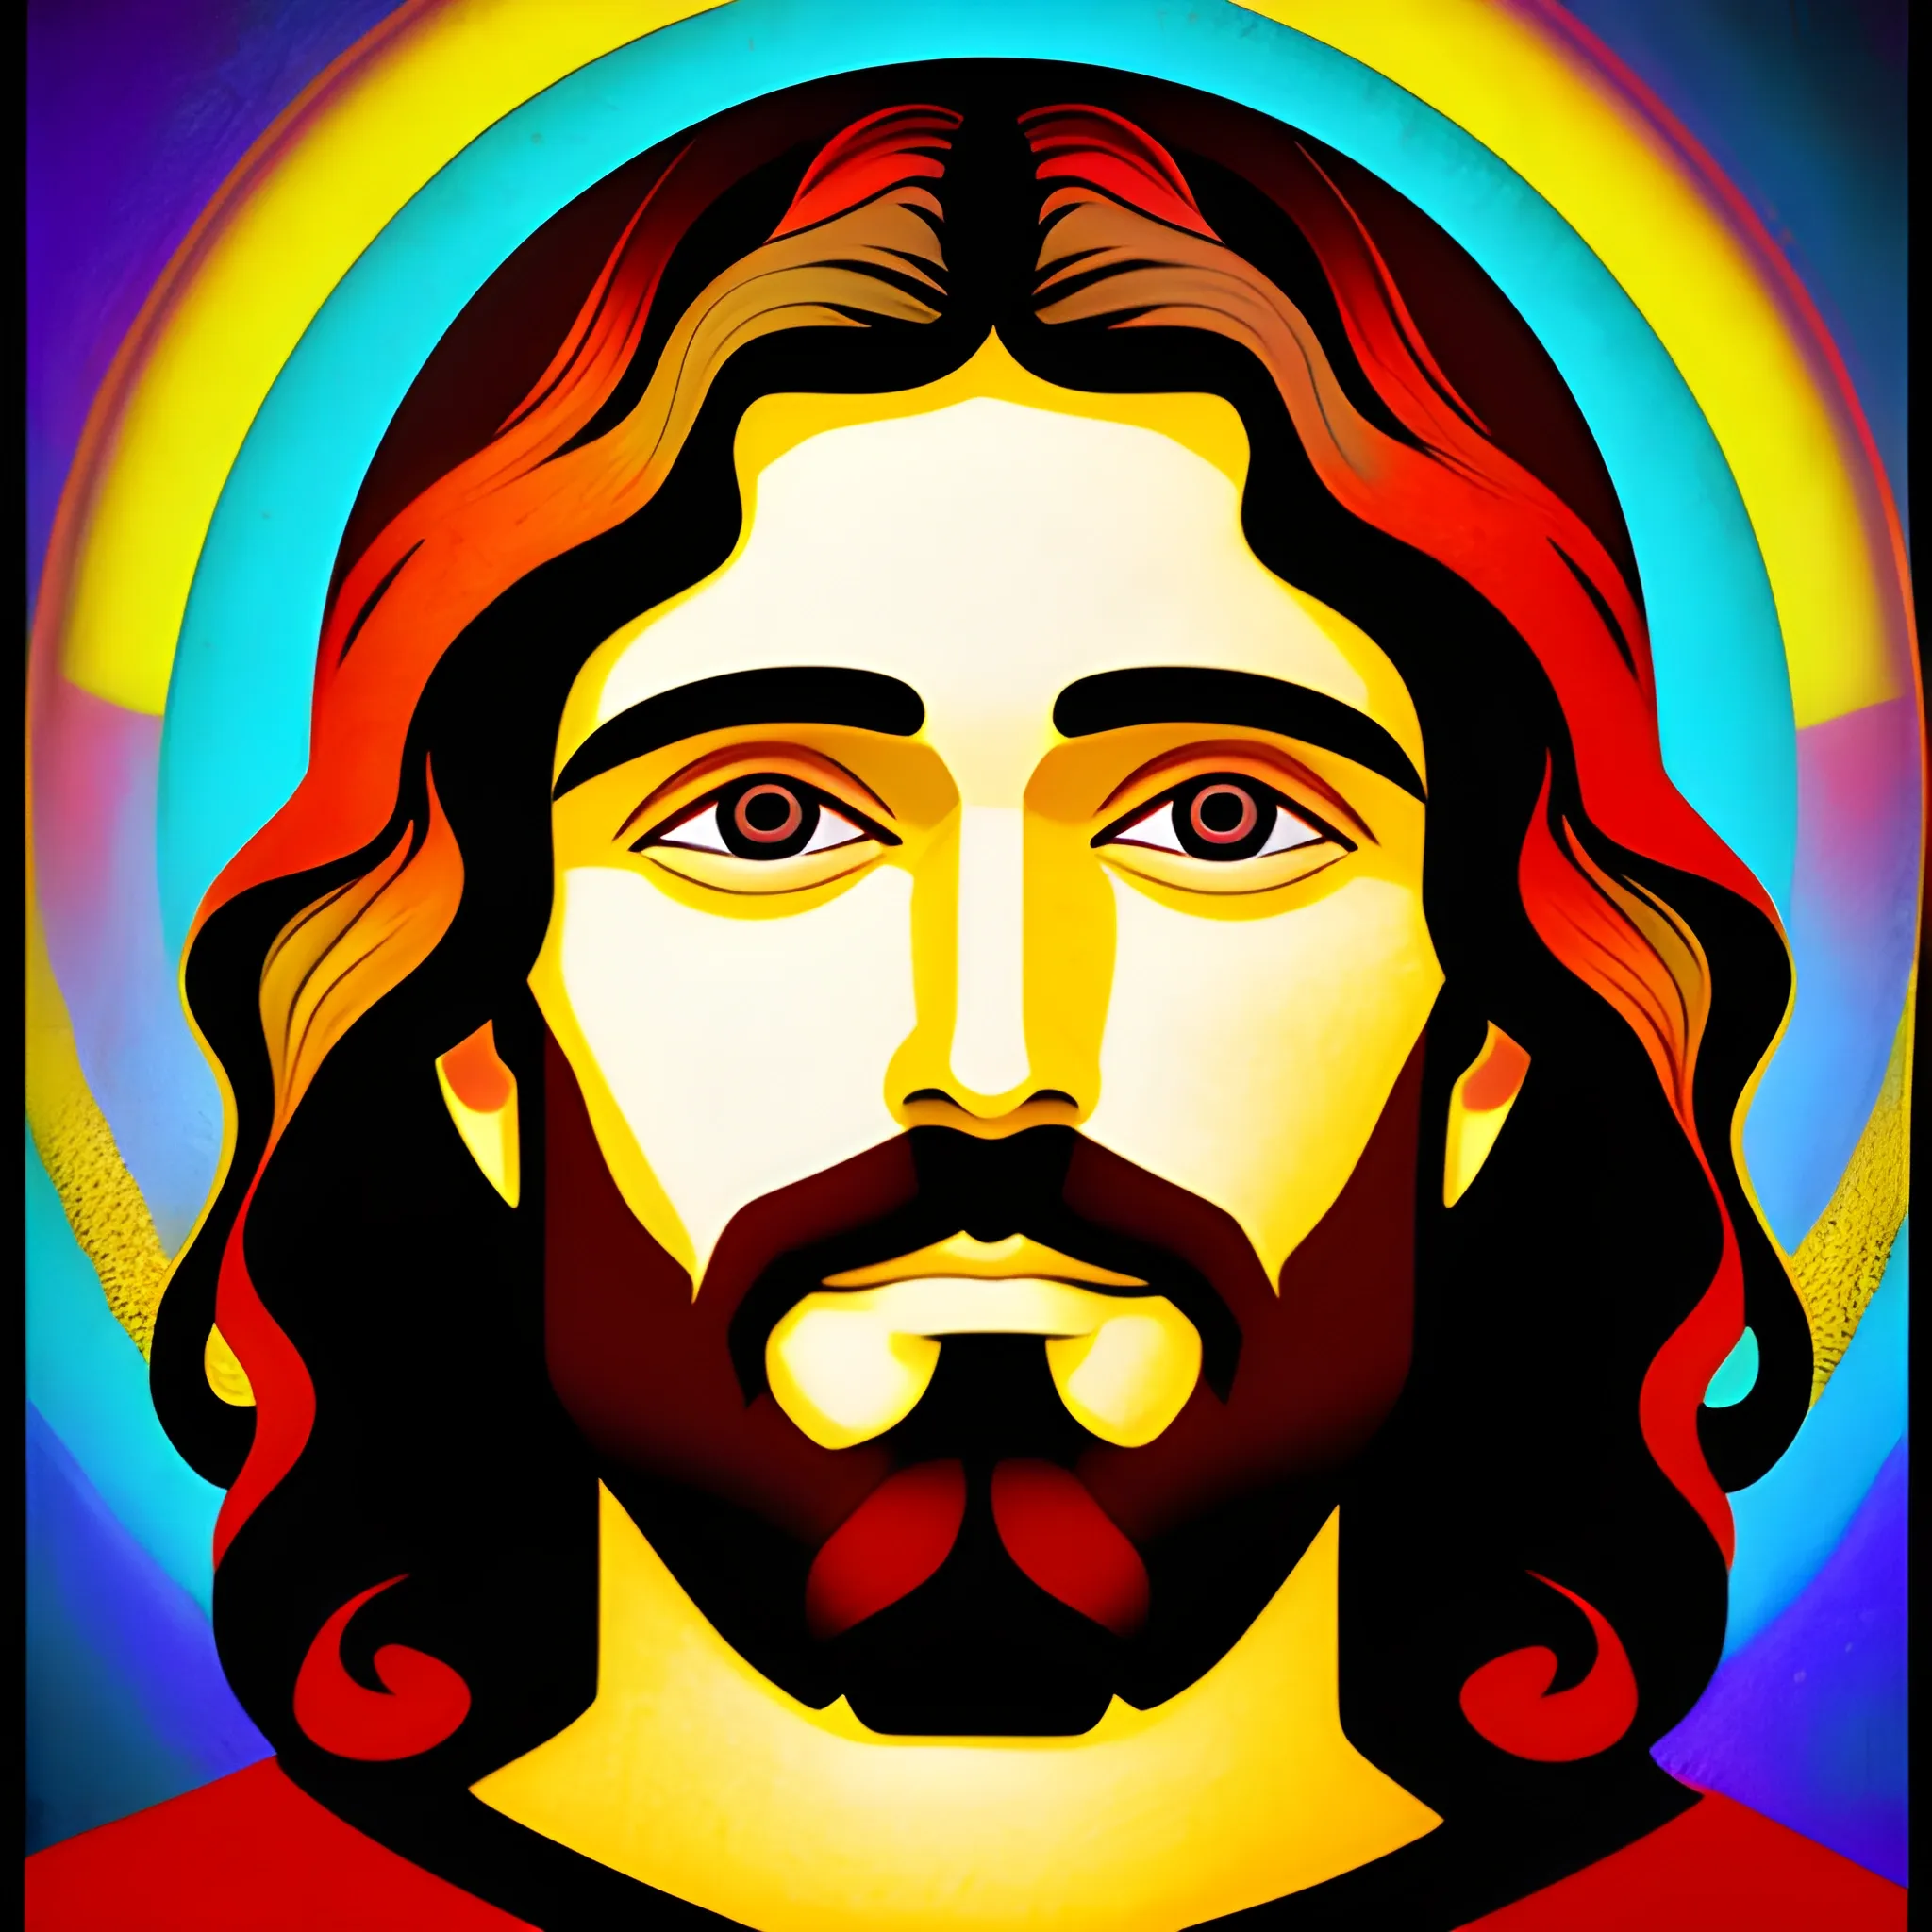 Jesus in the style of DMT
